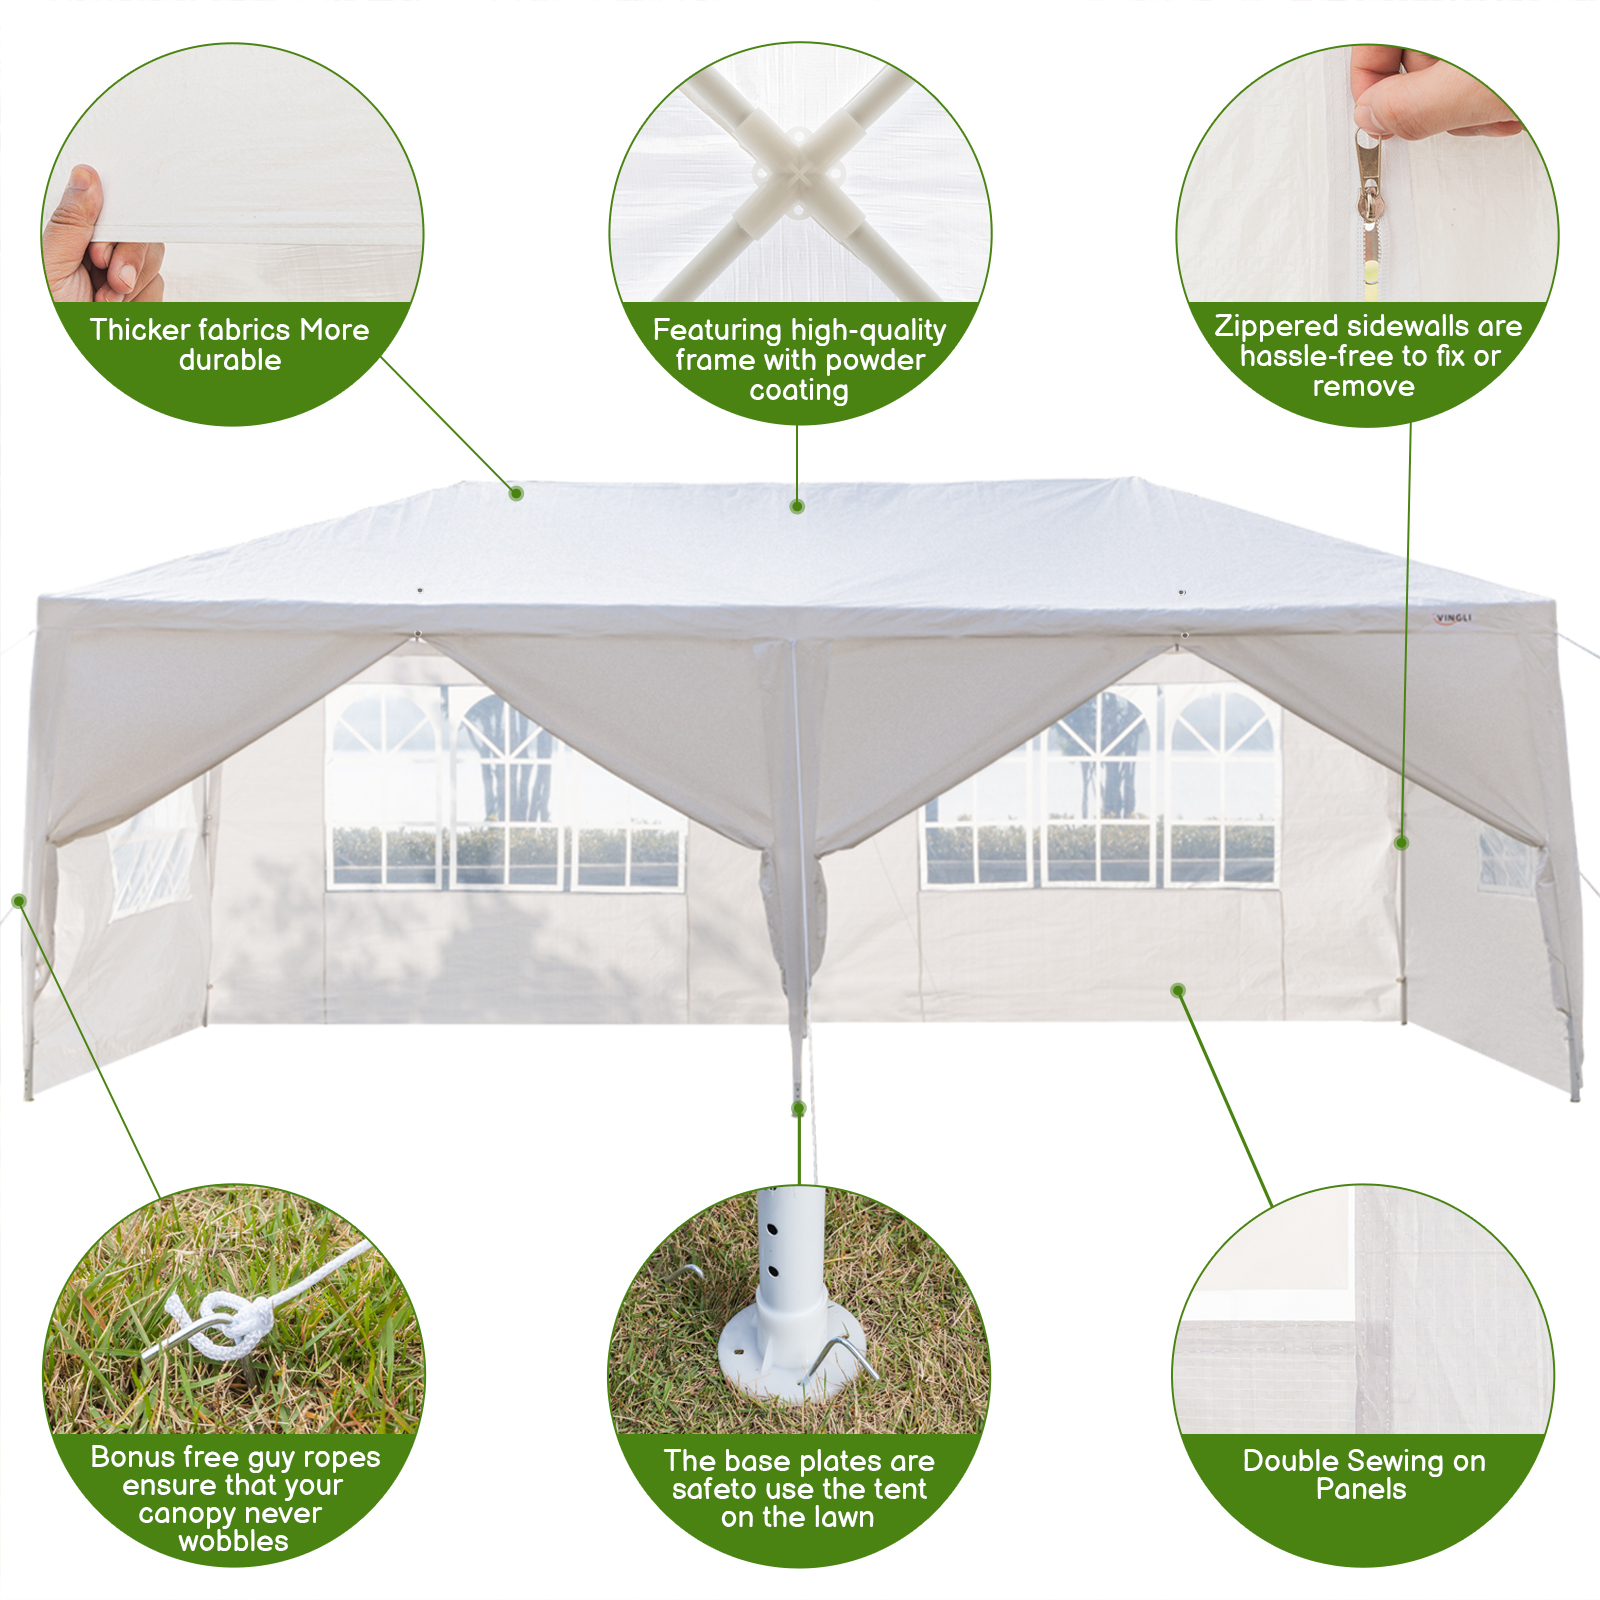 Ktaxon 10'x 20' Party Tent Outdoor Gazebo Wedding Canopy Tent with Sides White - image 4 of 9